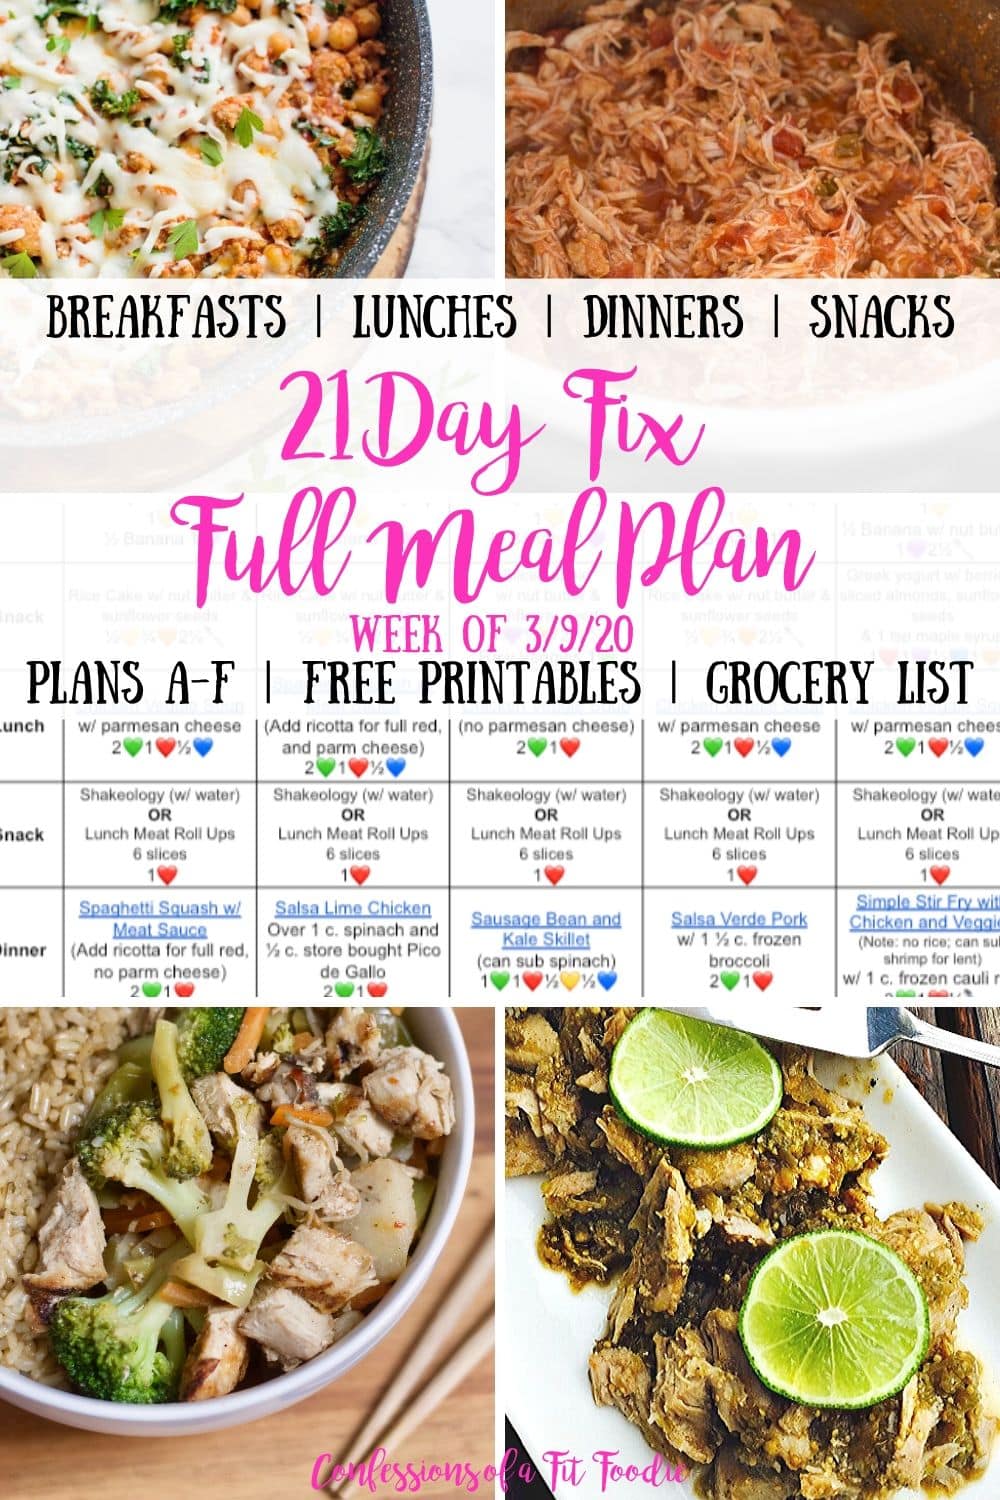 https://confessionsofafitfoodie.com/wp-content/uploads/2020/03/Full-meal-plan-3.9.20.jpg